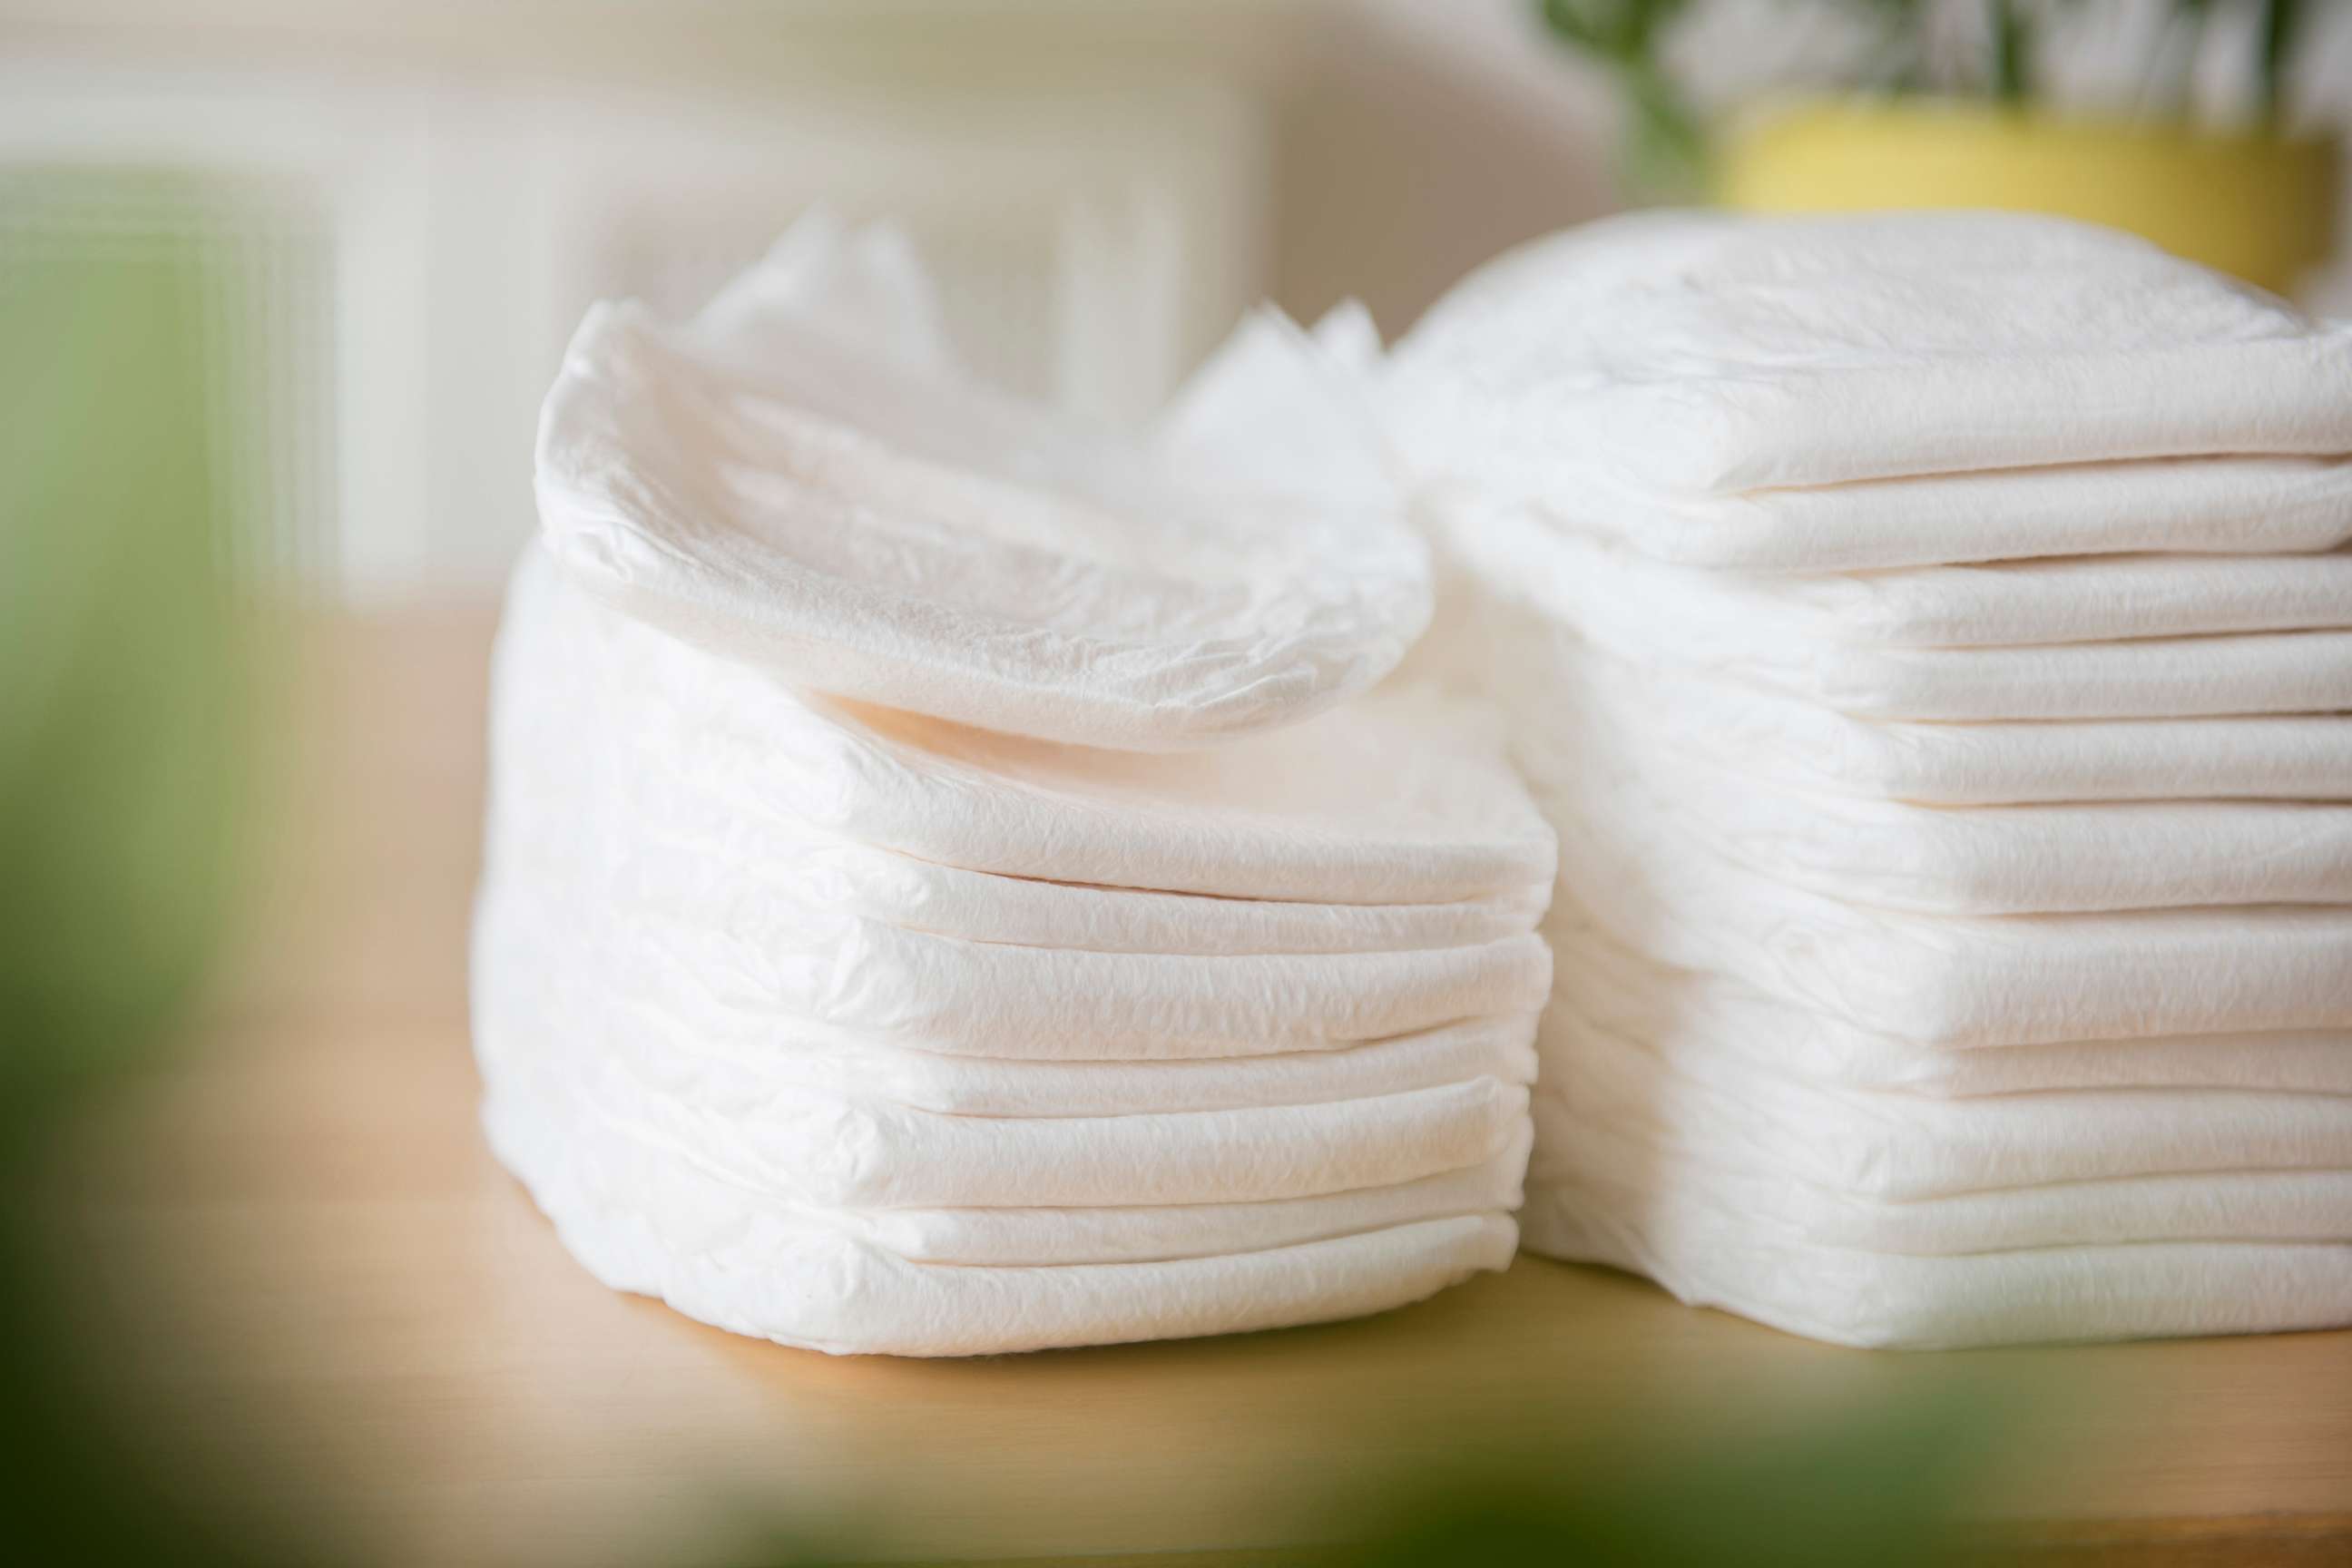 PHOTO: A pile of diapers are seen in this undated stock photo.